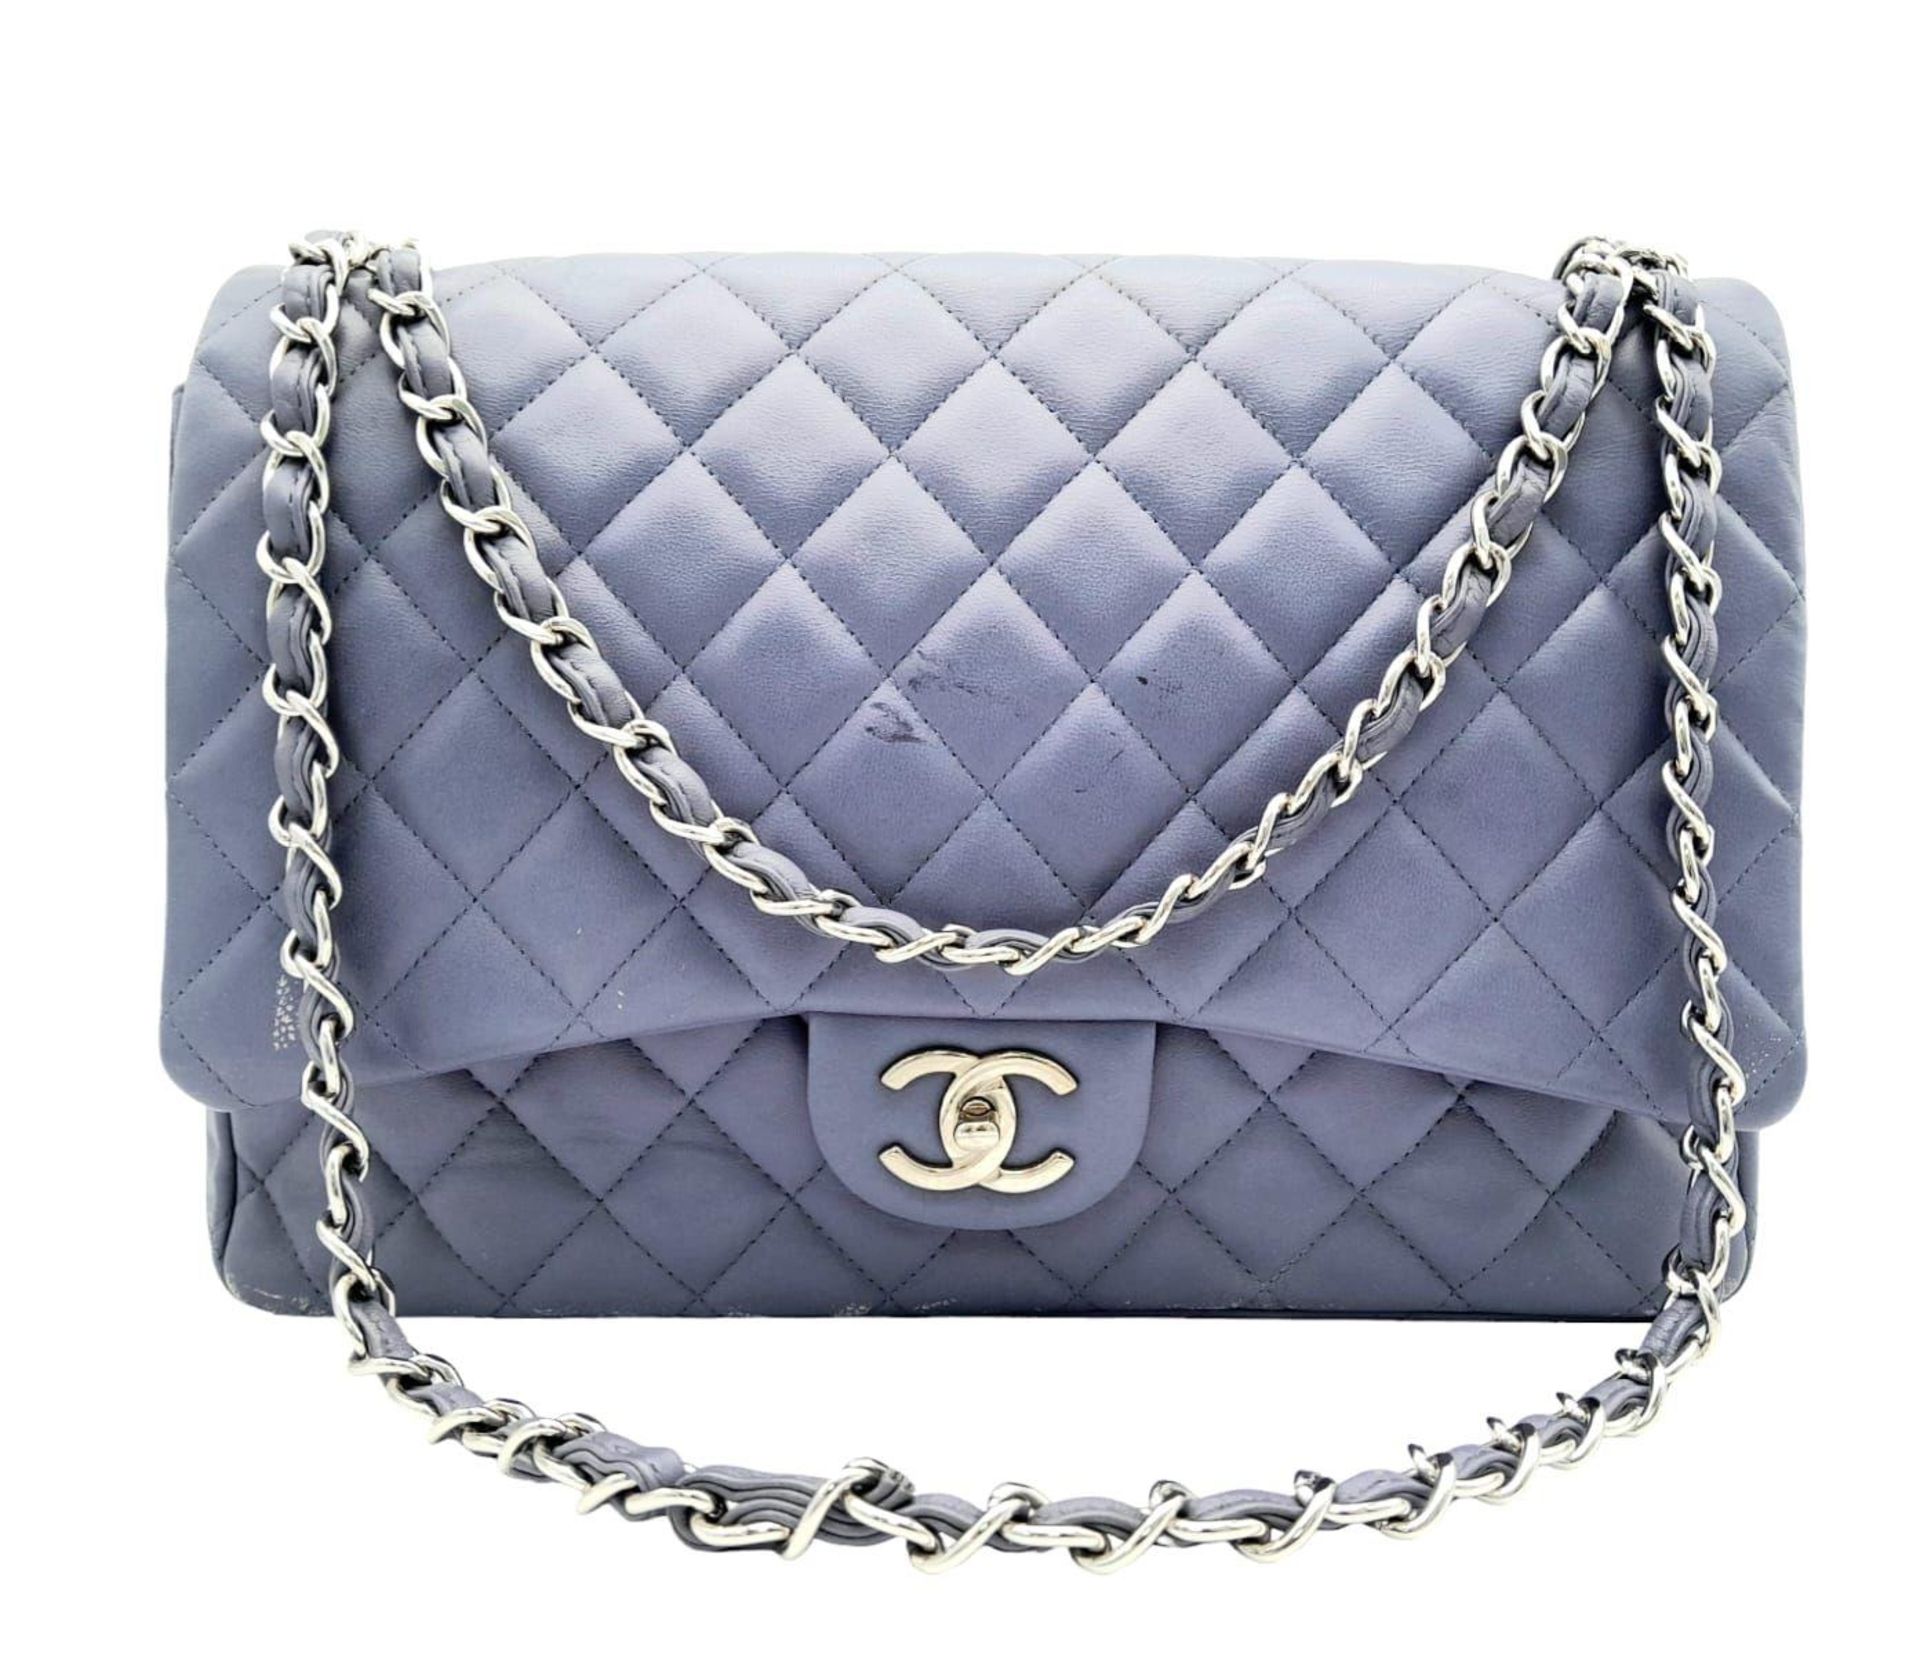 A Chanel Jumbo Double Flap Maxi Bag. Blue quilted caviar leather exterior with a large slip pocket